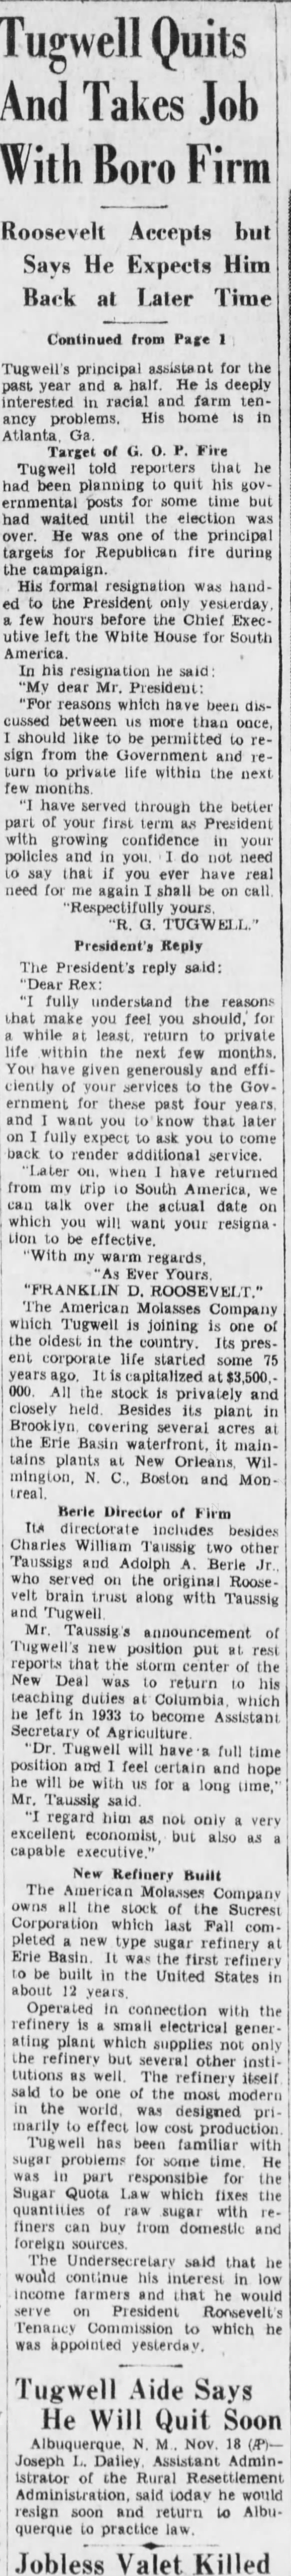 Brooklyn Eagle, Nov. 18, 1936 (cont. from p.1)